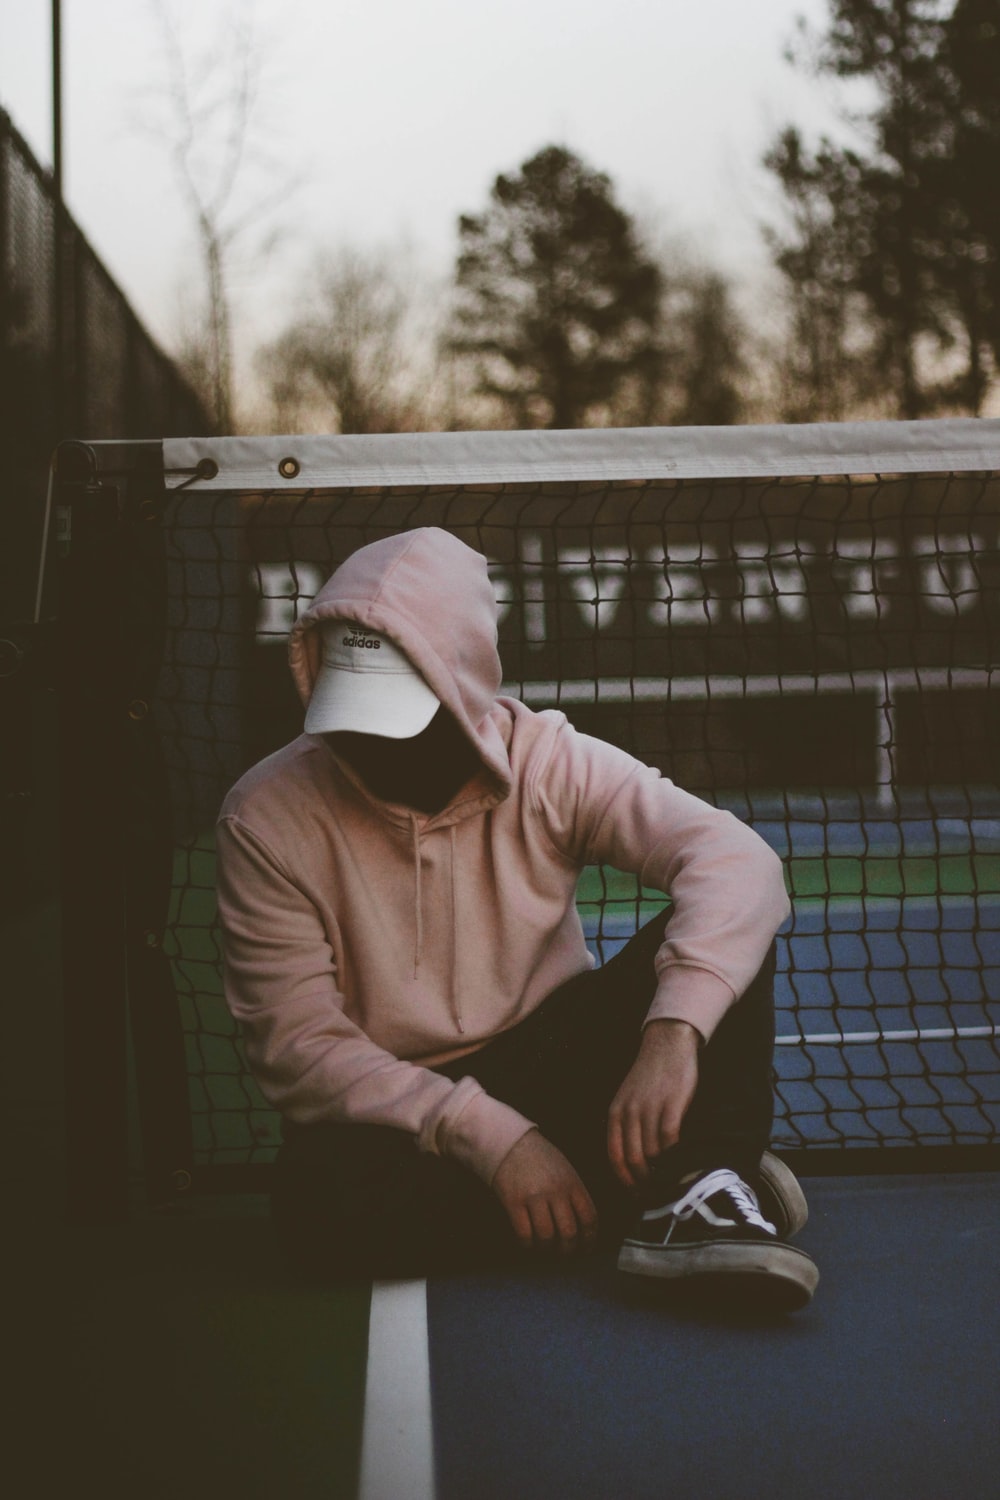 No Face Picture [HD]. Download Free Image